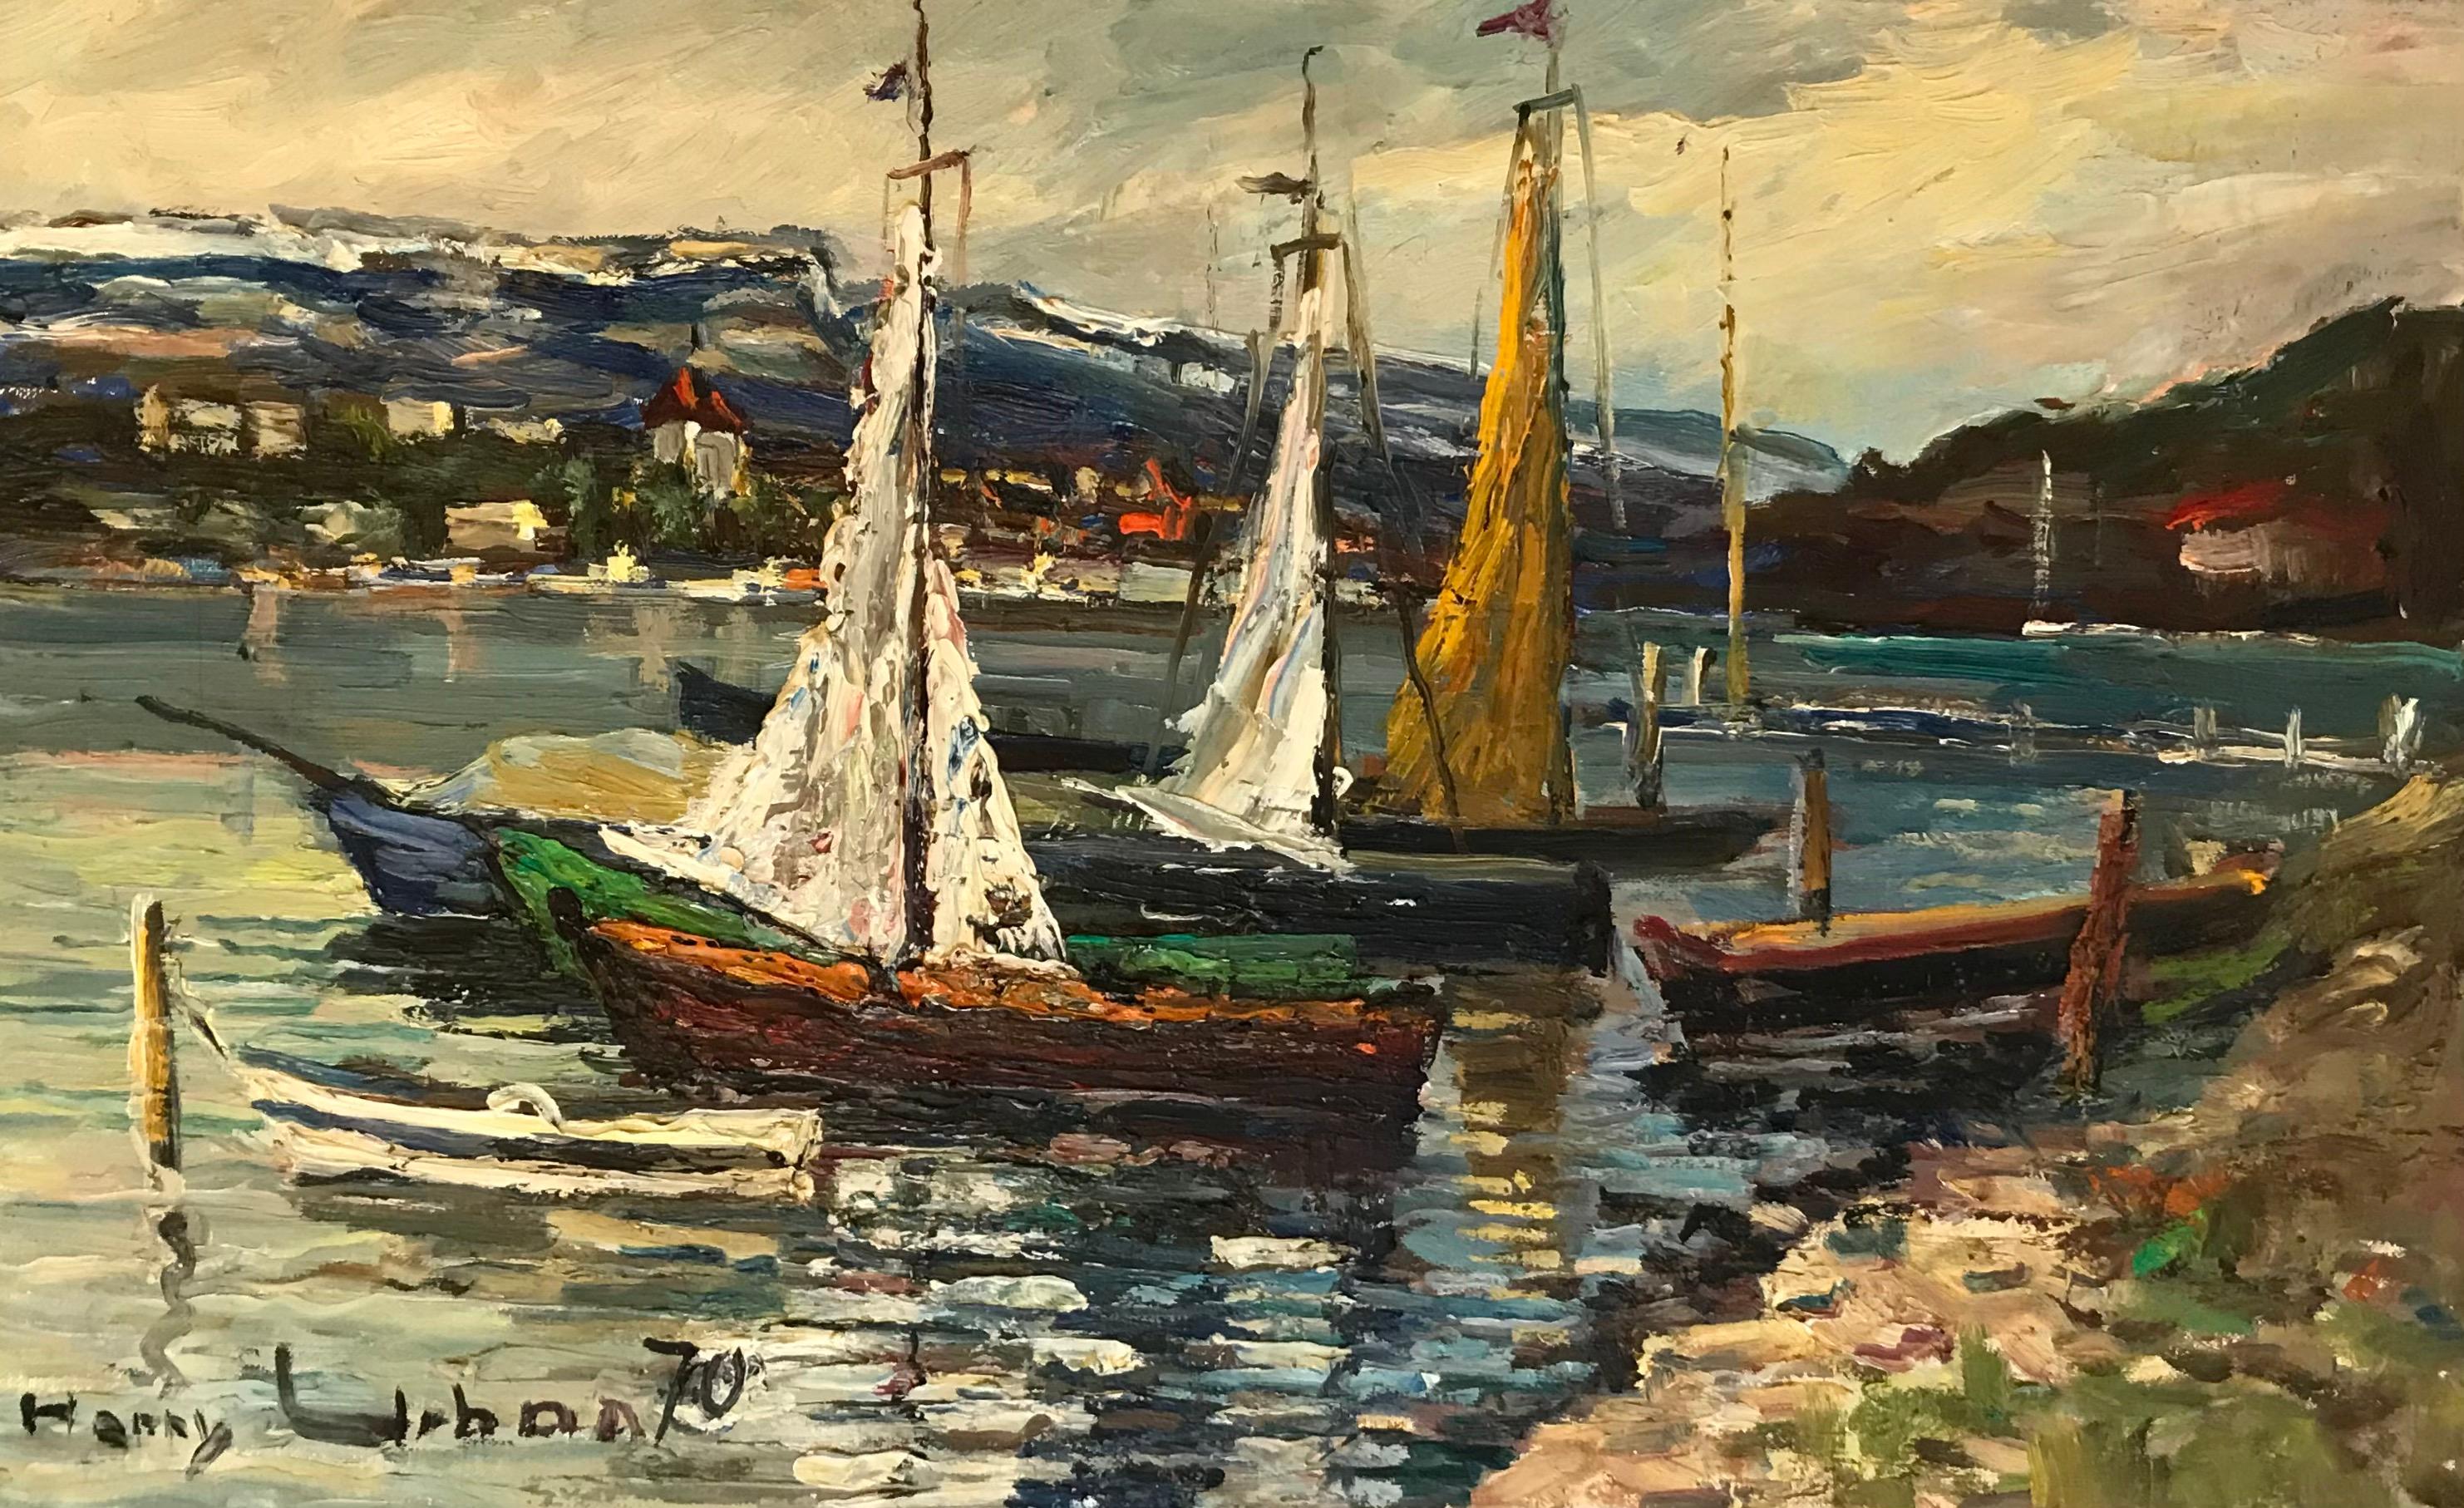 Harry Urban Landscape Painting - Sailboats by the lake